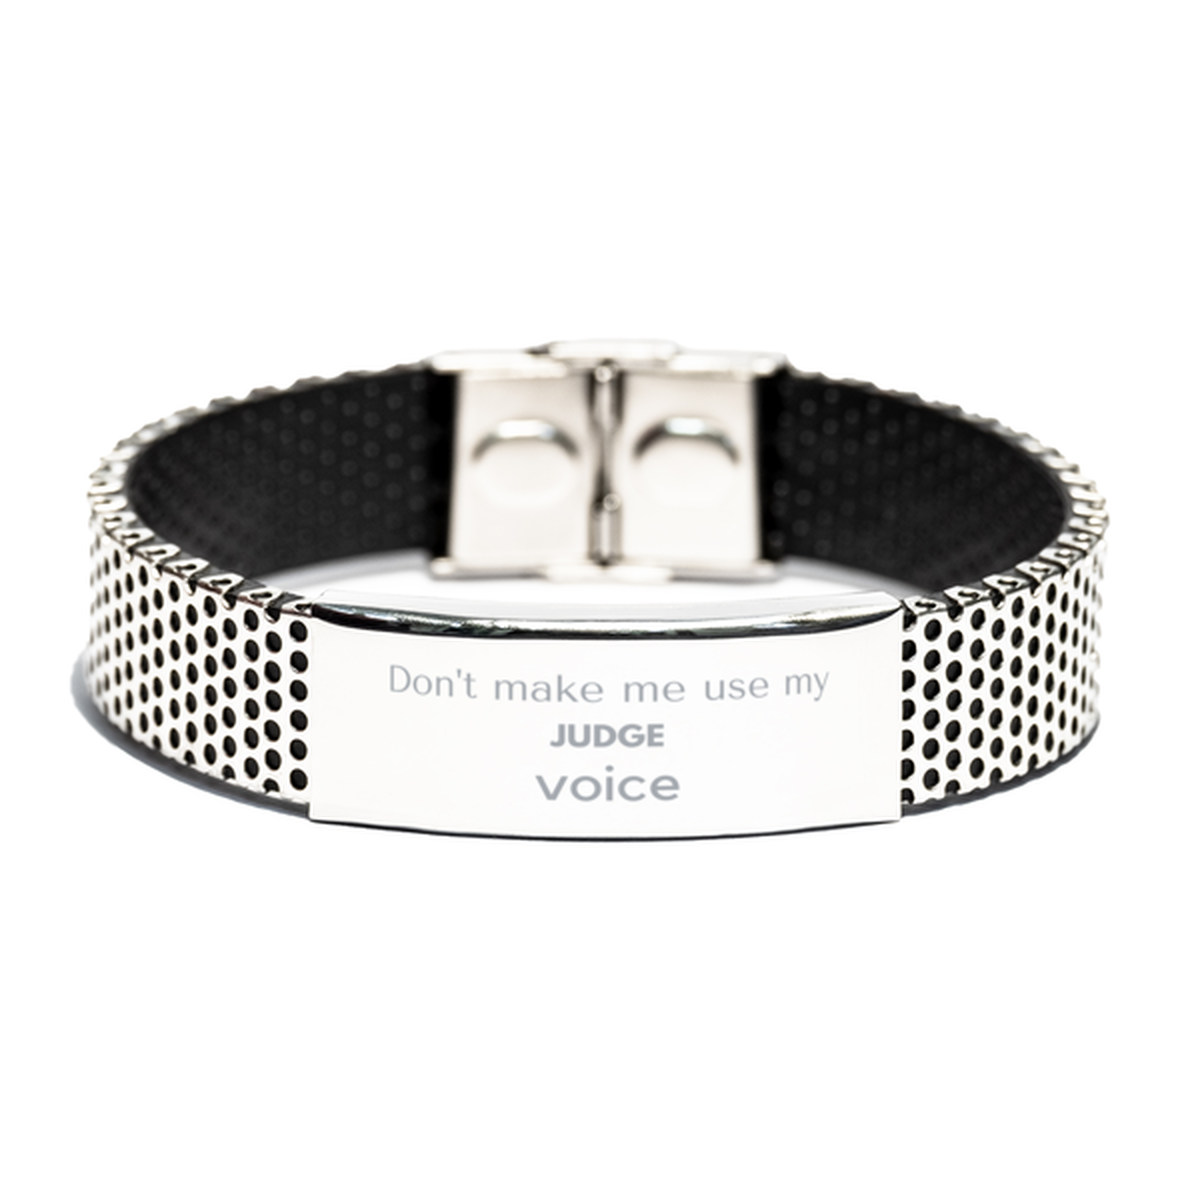 Don't make me use my Judge voice, Sarcasm Judge Gifts, Christmas Judge Stainless Steel Bracelet Birthday Unique Gifts For Judge Coworkers, Men, Women, Colleague, Friends